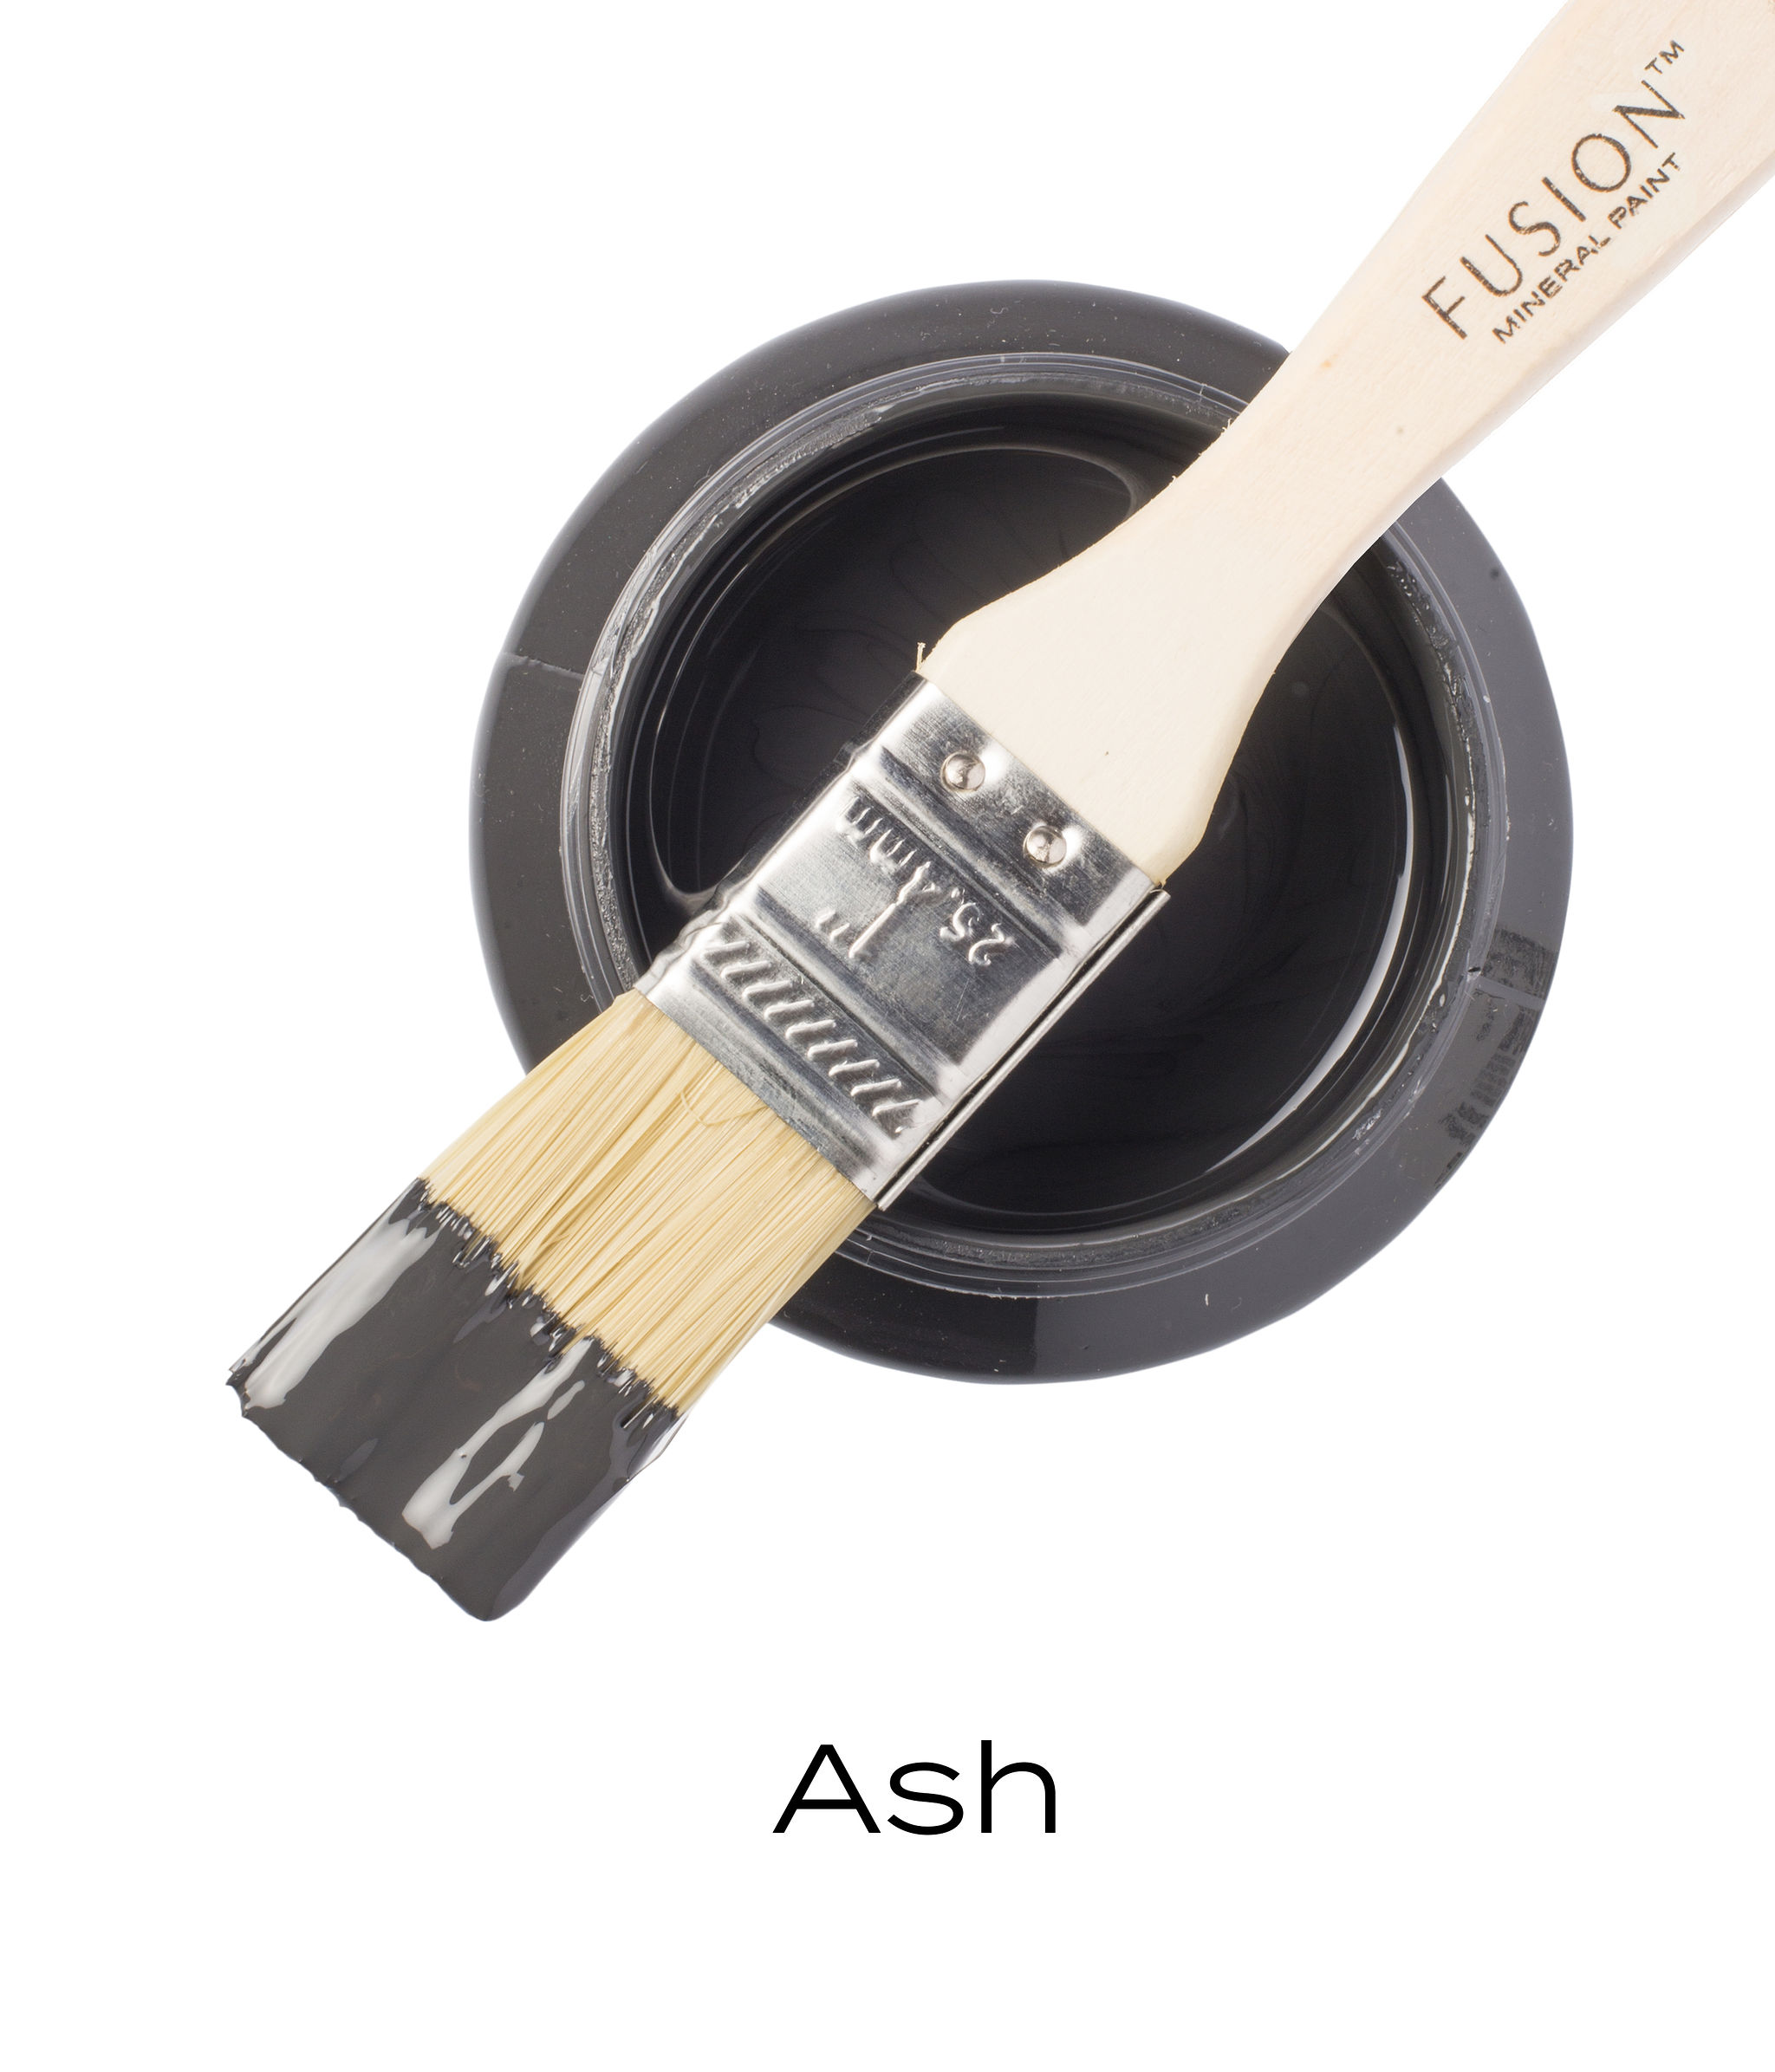 Ash Fusion Mineral Paint Goed Gestyled